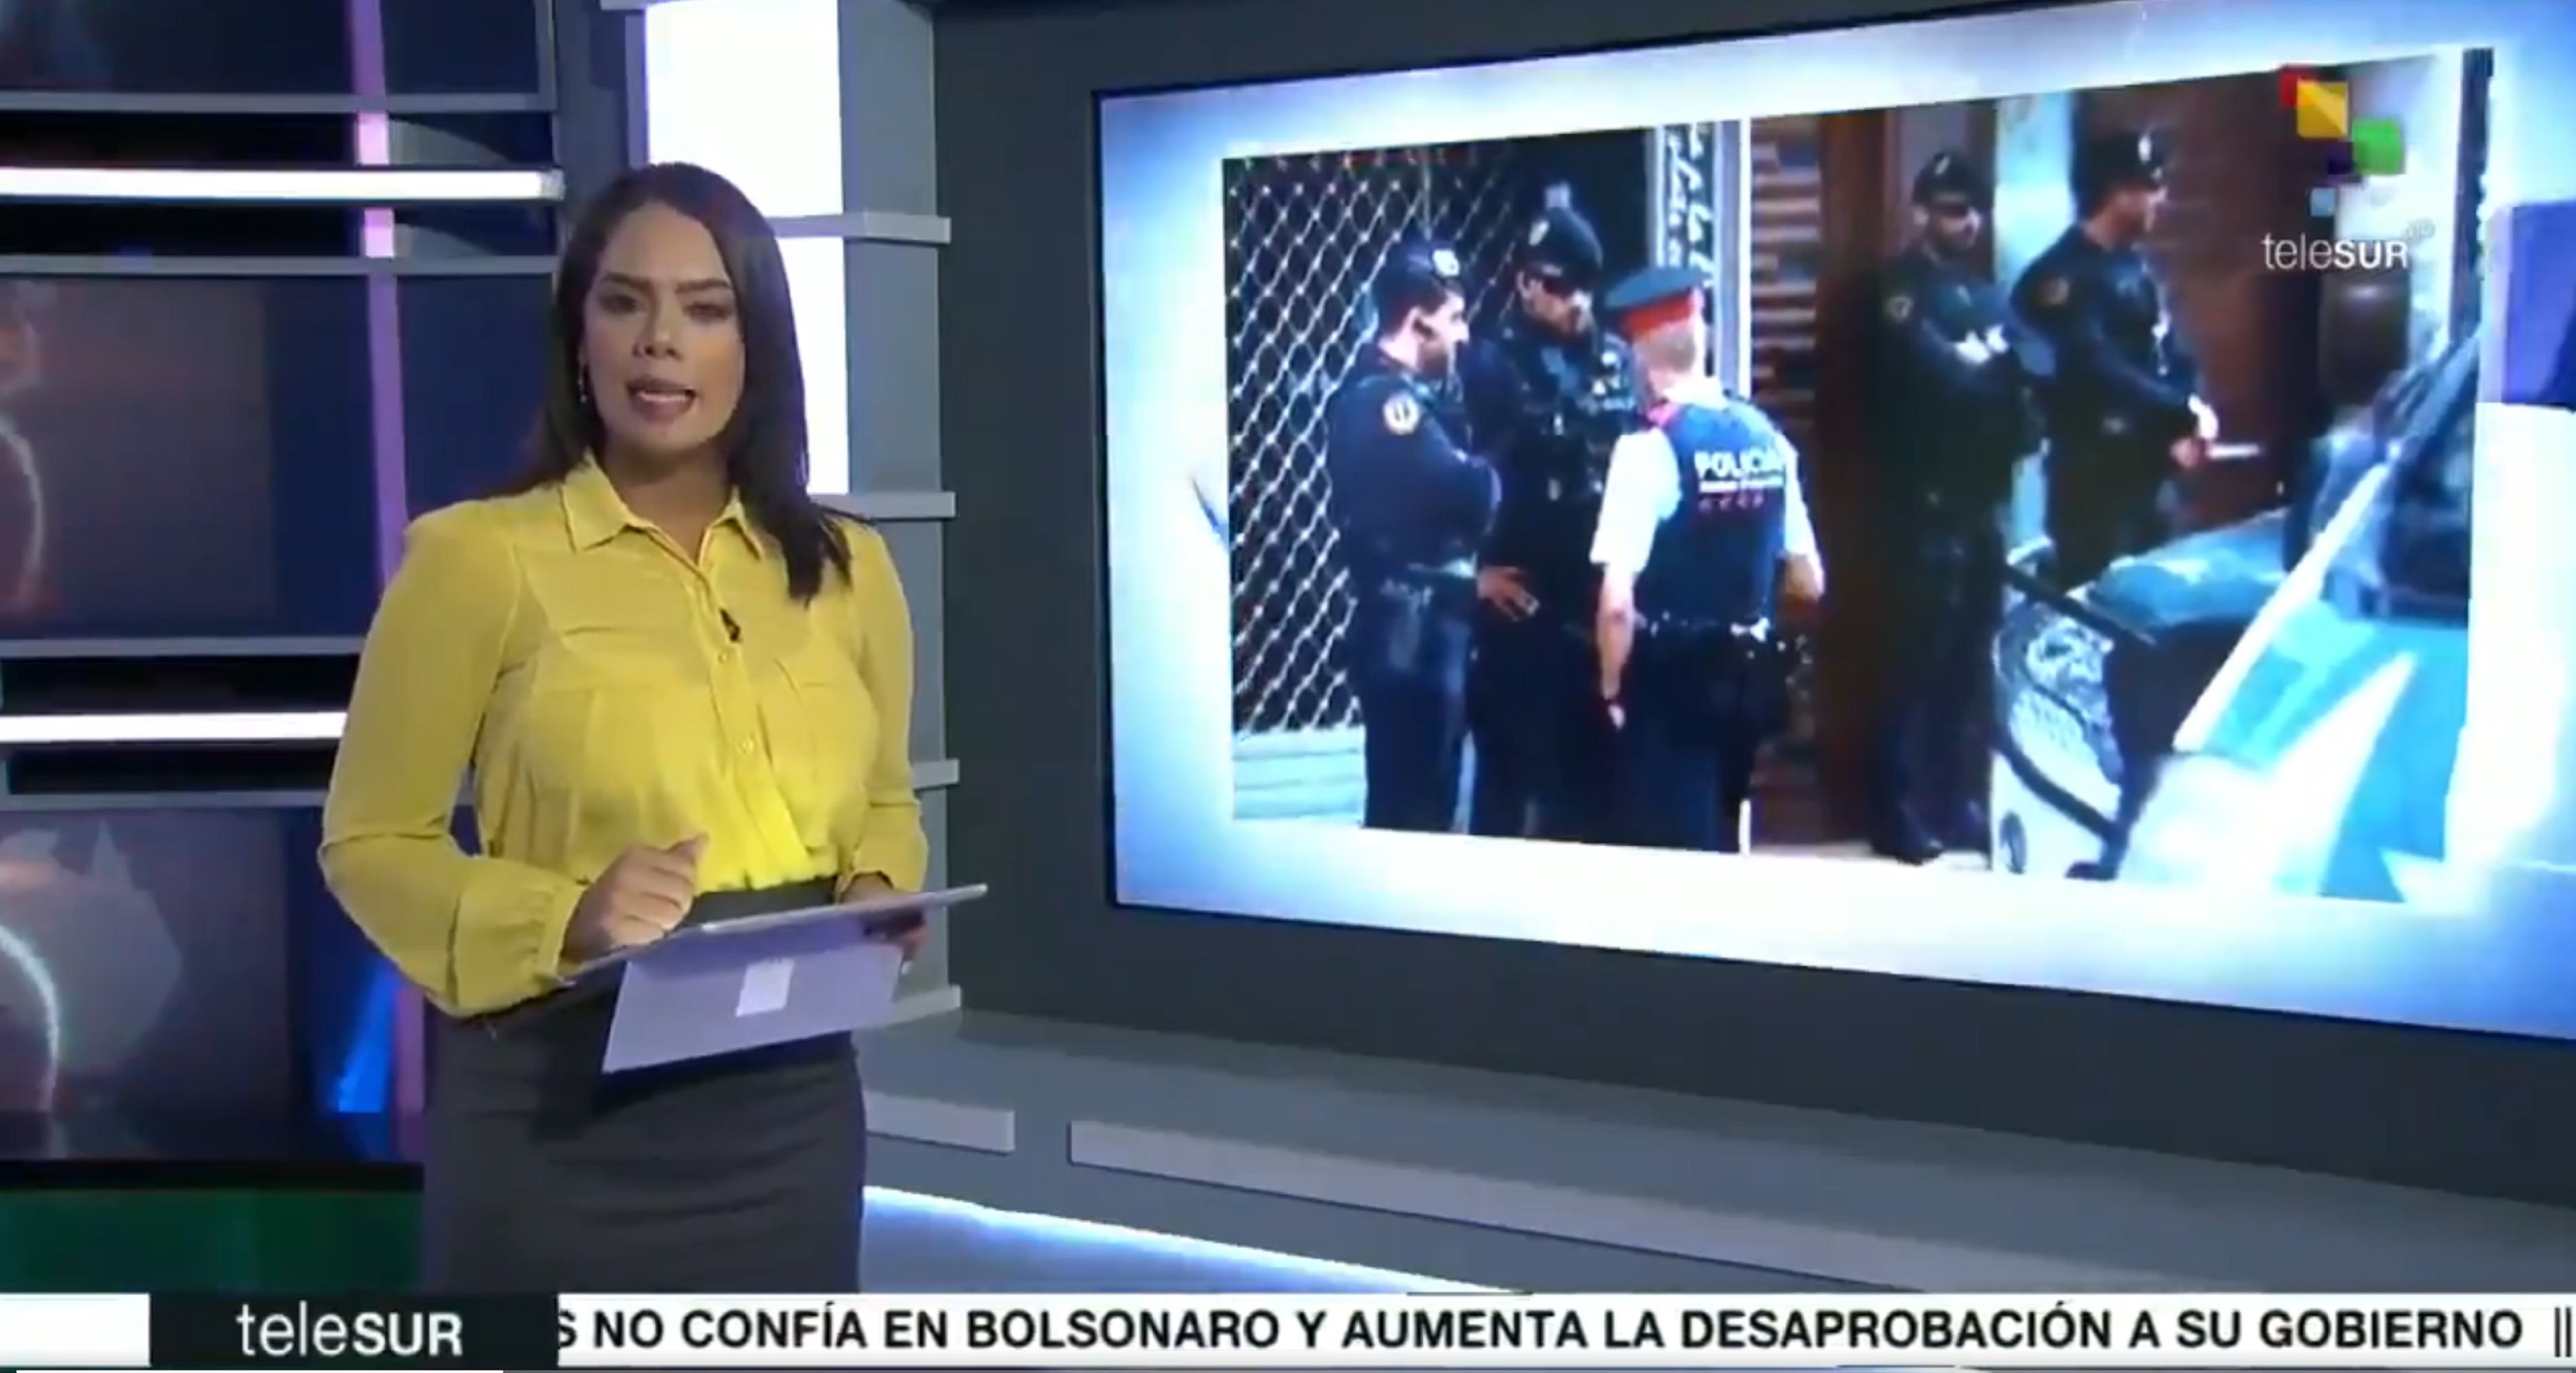 Latin American TV network questions Spanish police case against "alleged terrorists"